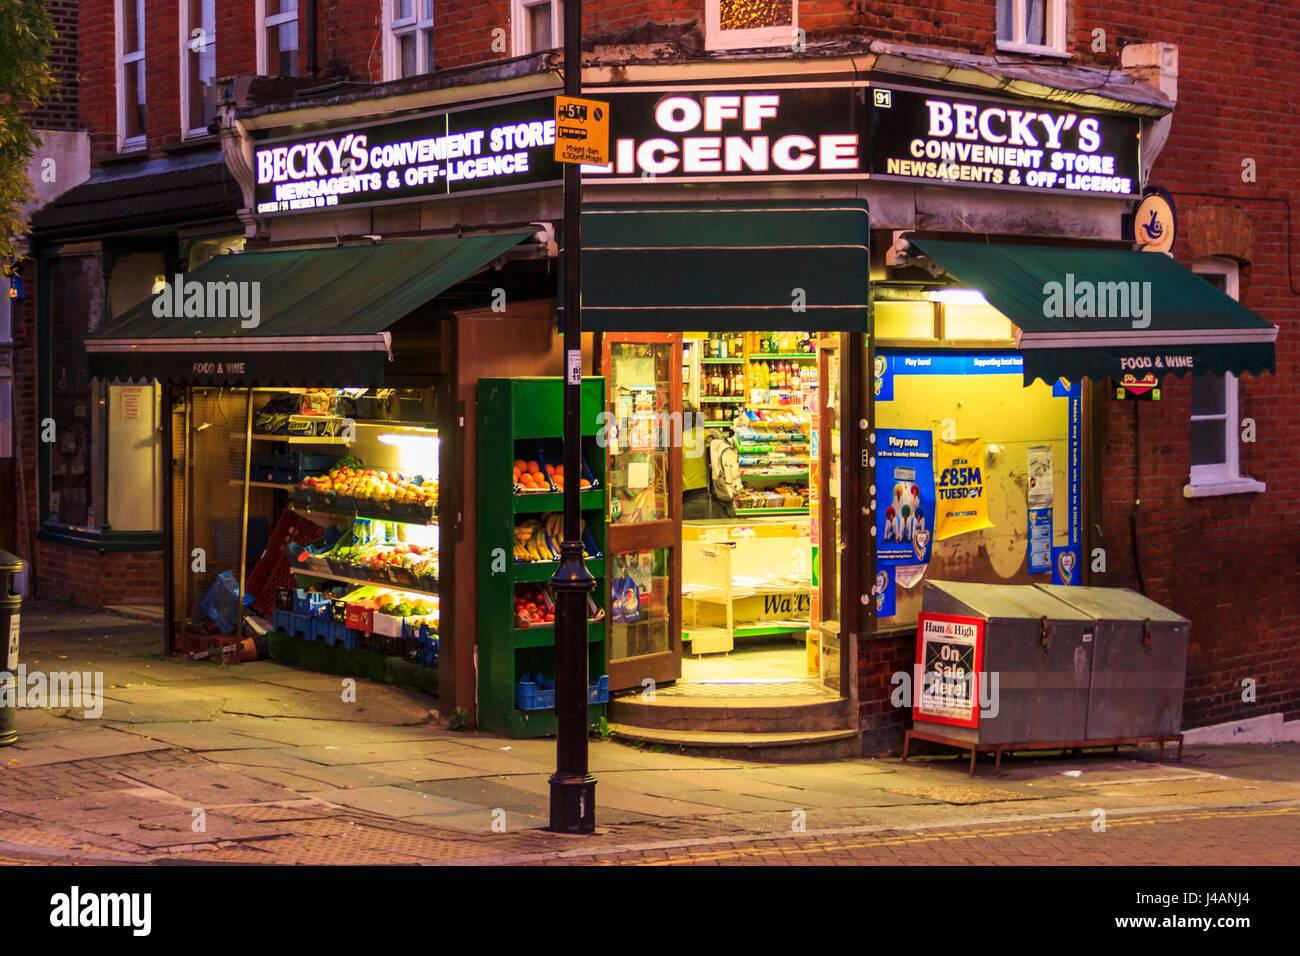 'Becky's' Off Licence, newsagent and convenience store, a traditional corner shop in Islington, North London, UK, at night Stock Photo